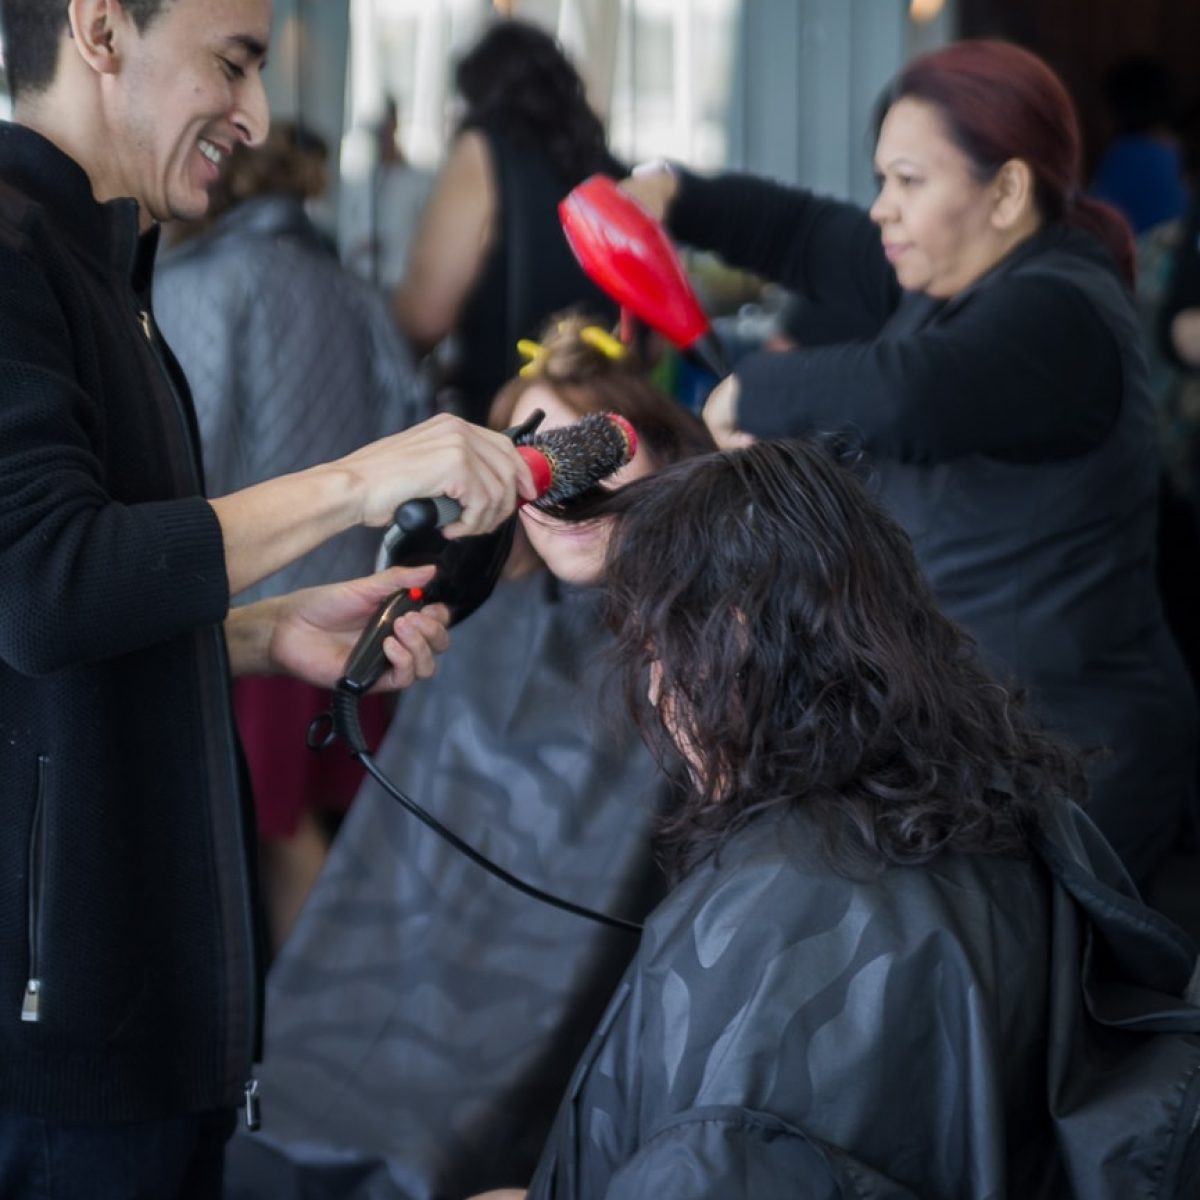 Univision features Mother's Day Makeovers event put on by the Daisie Foundation in 2018. Check out the video here from the feature!